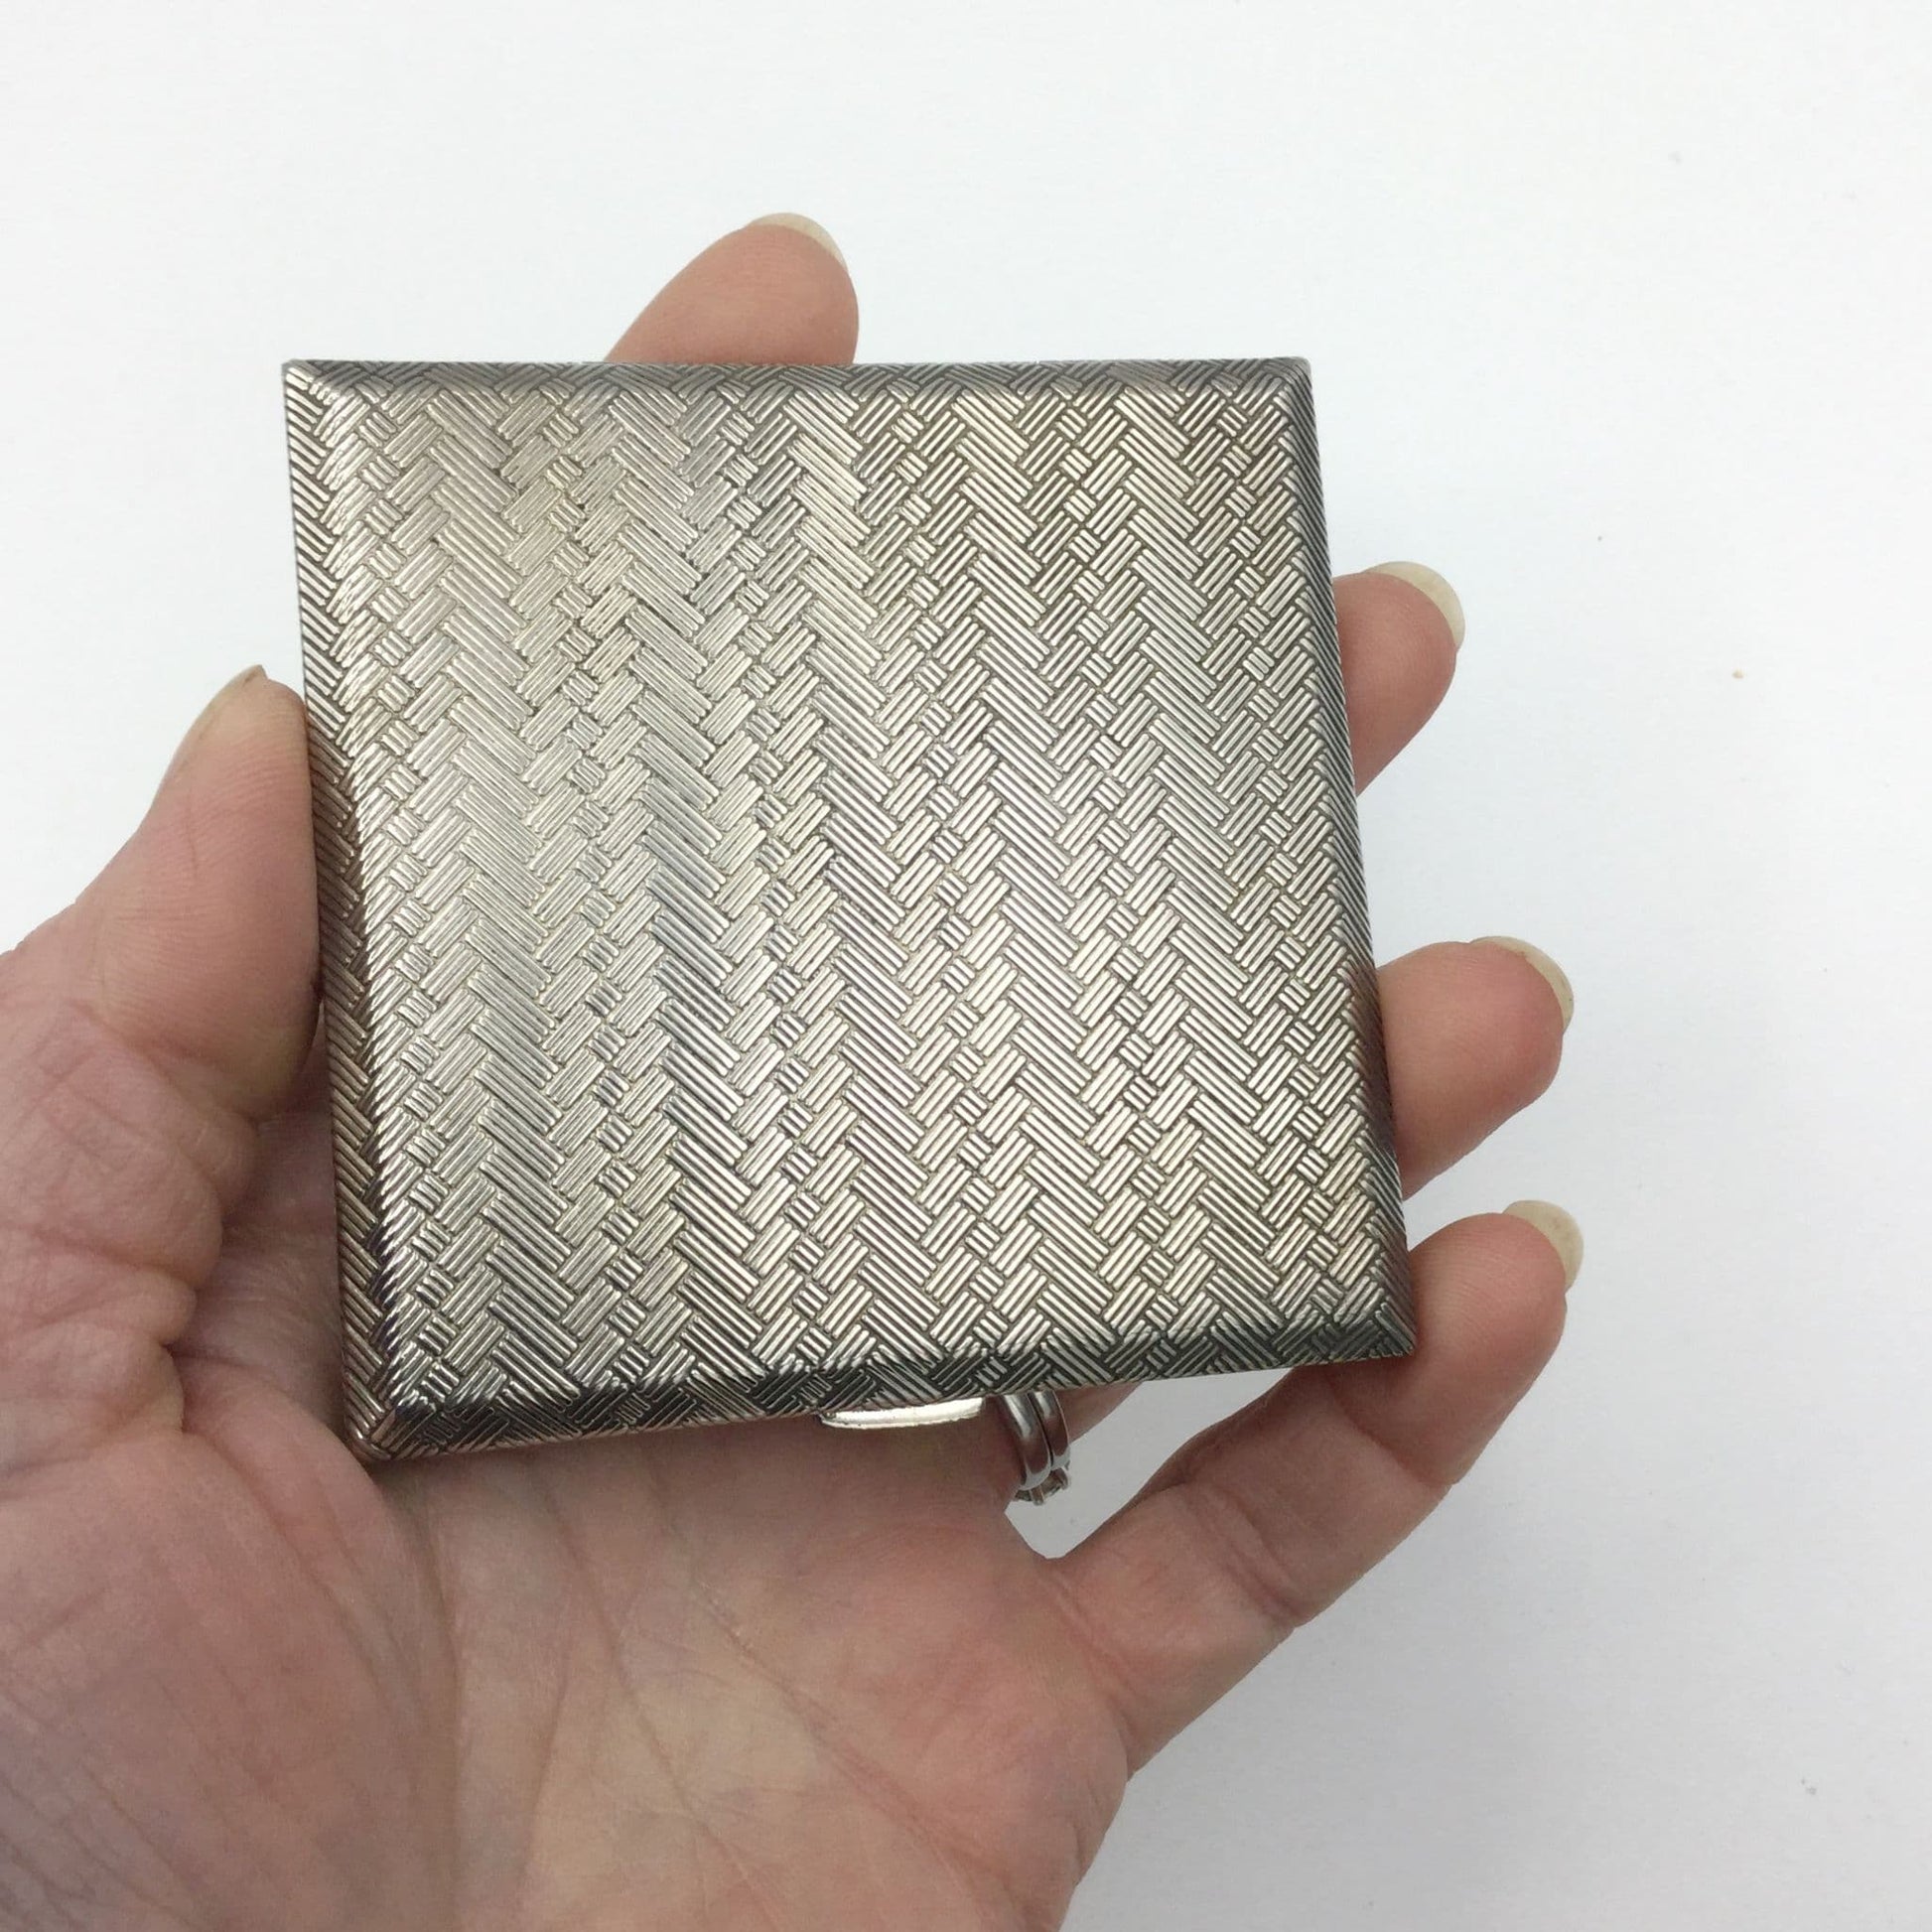 A silver coloured square compact with a woven pattern to the lid. It is being held in a hand.